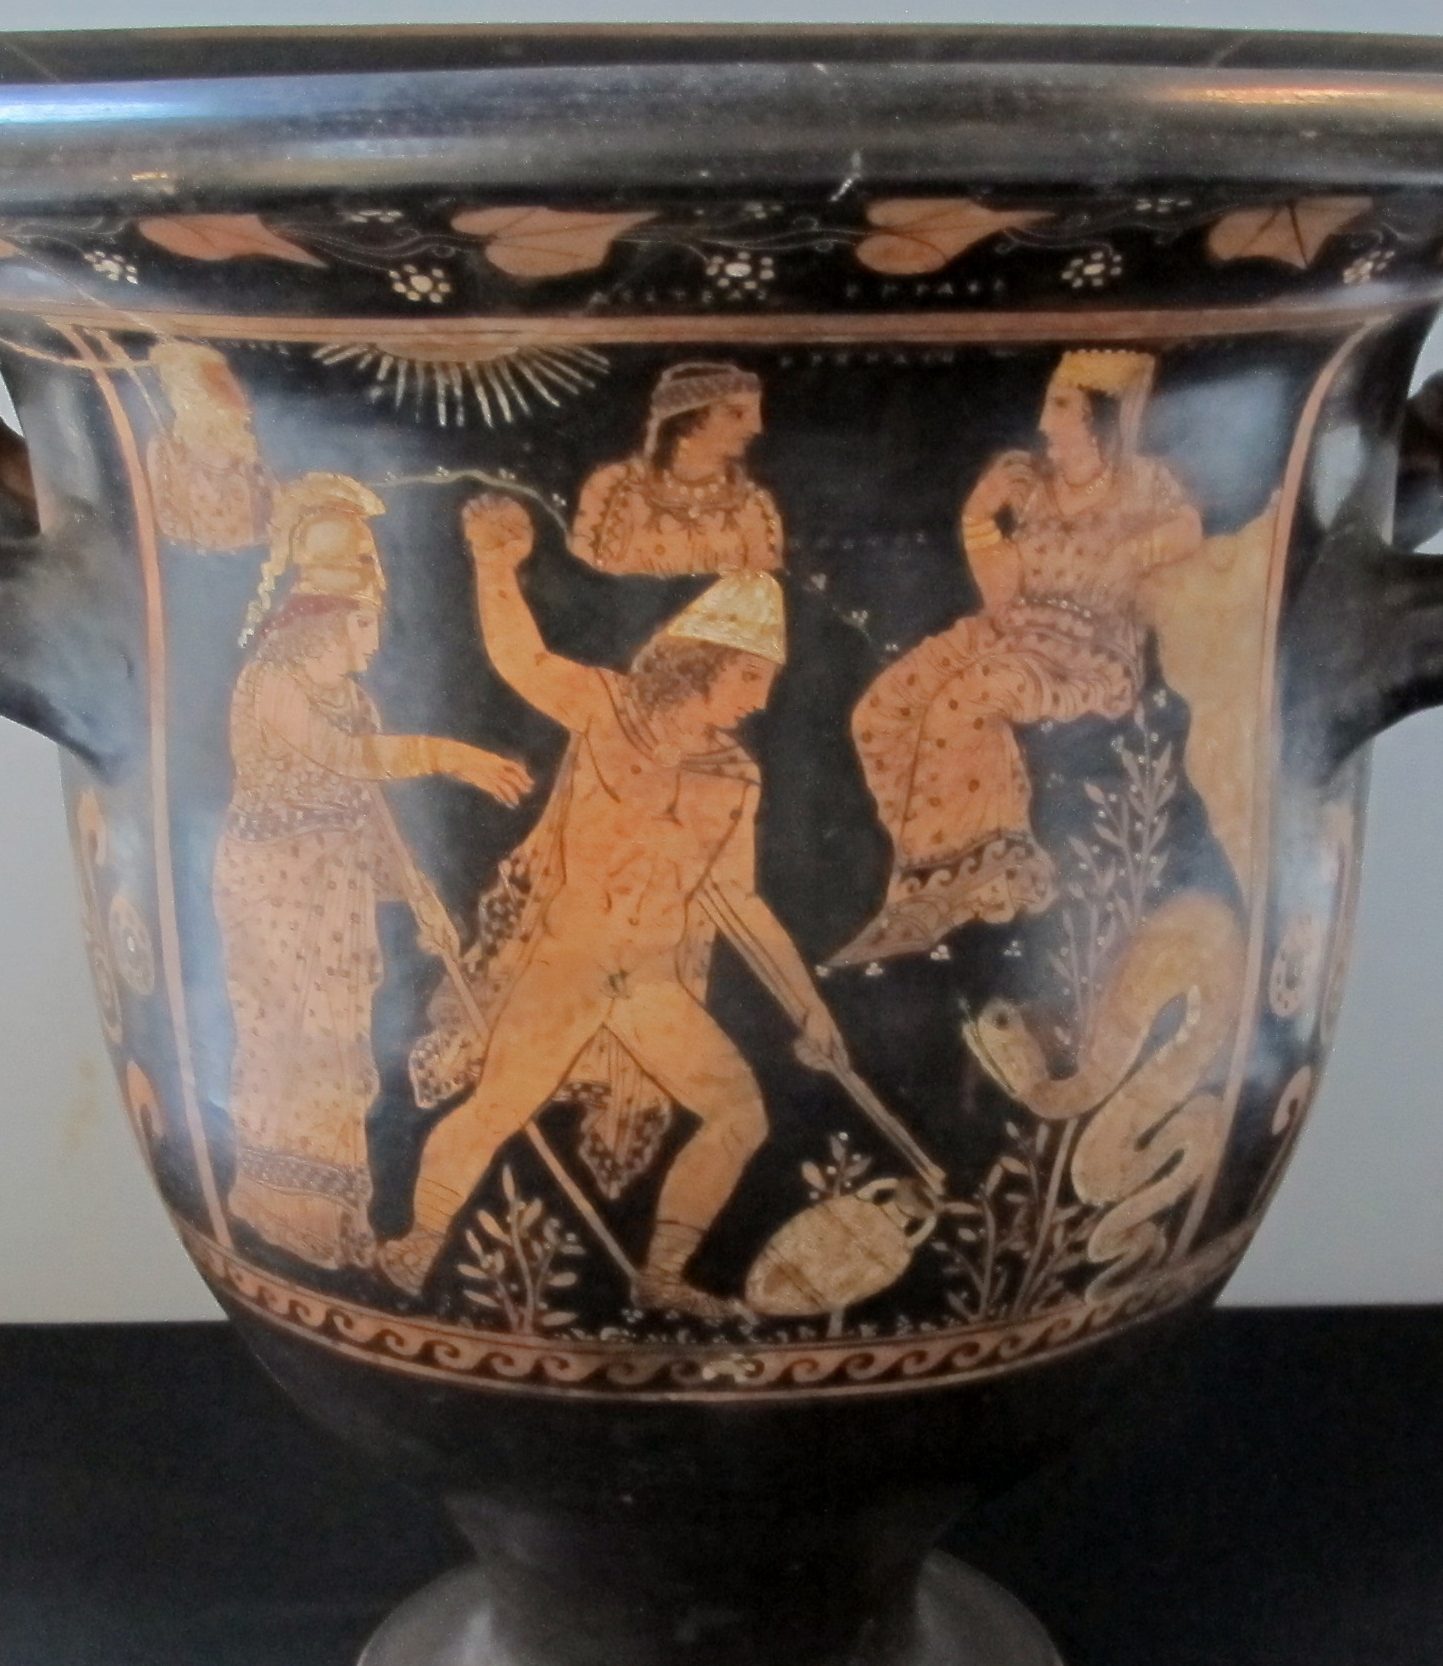 Cadmus, nude with a chlamys cape and a rounded helm. He has one fist raised, and an amphora lies on the ground by his other handA snake-like dragon is coiled by a tree in front of him. Three figures sit in the sky above Cadmus, and Athena stands behind him.